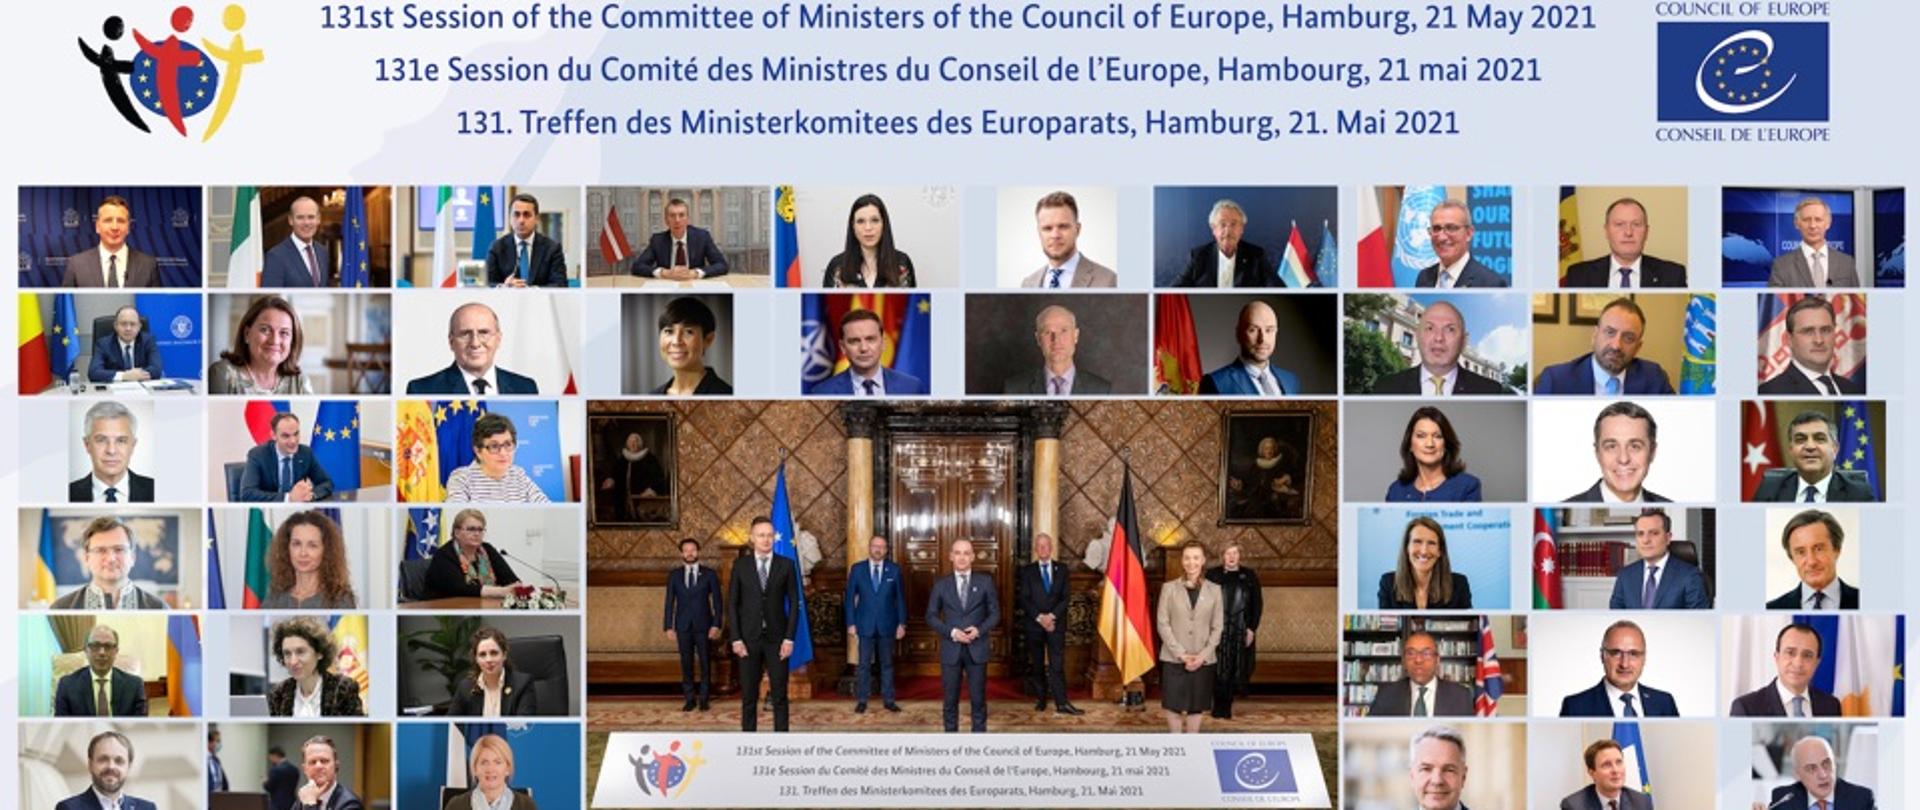 Minister Zbigniew Rau took part in the 131st session of the Committee of Ministers of the Council of Europe